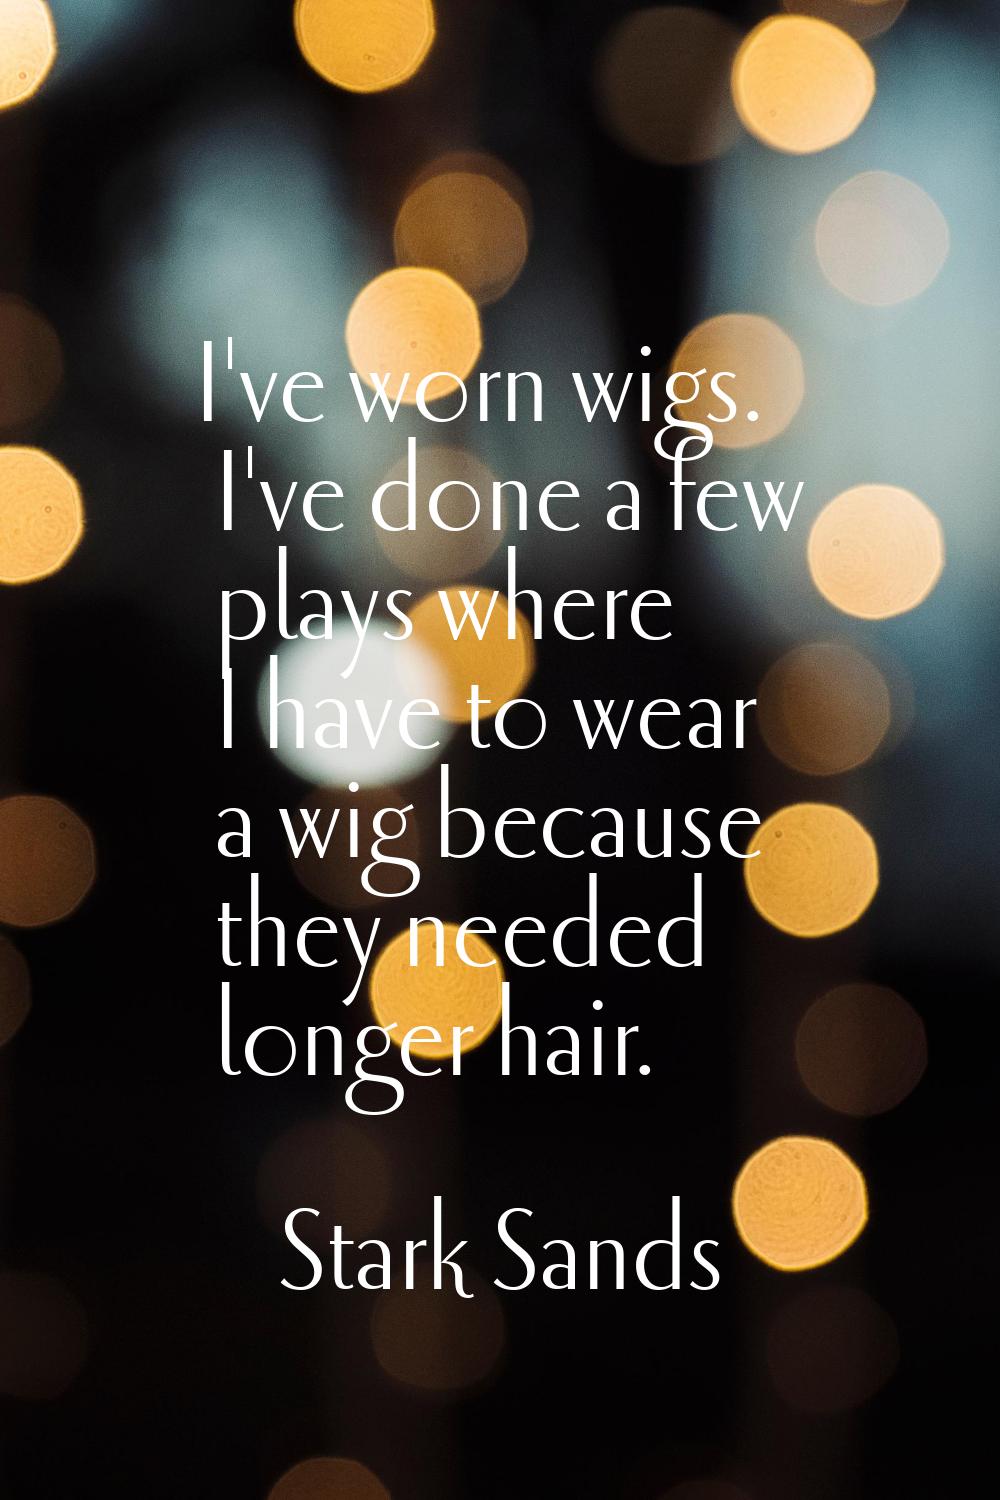 I've worn wigs. I've done a few plays where I have to wear a wig because they needed longer hair.